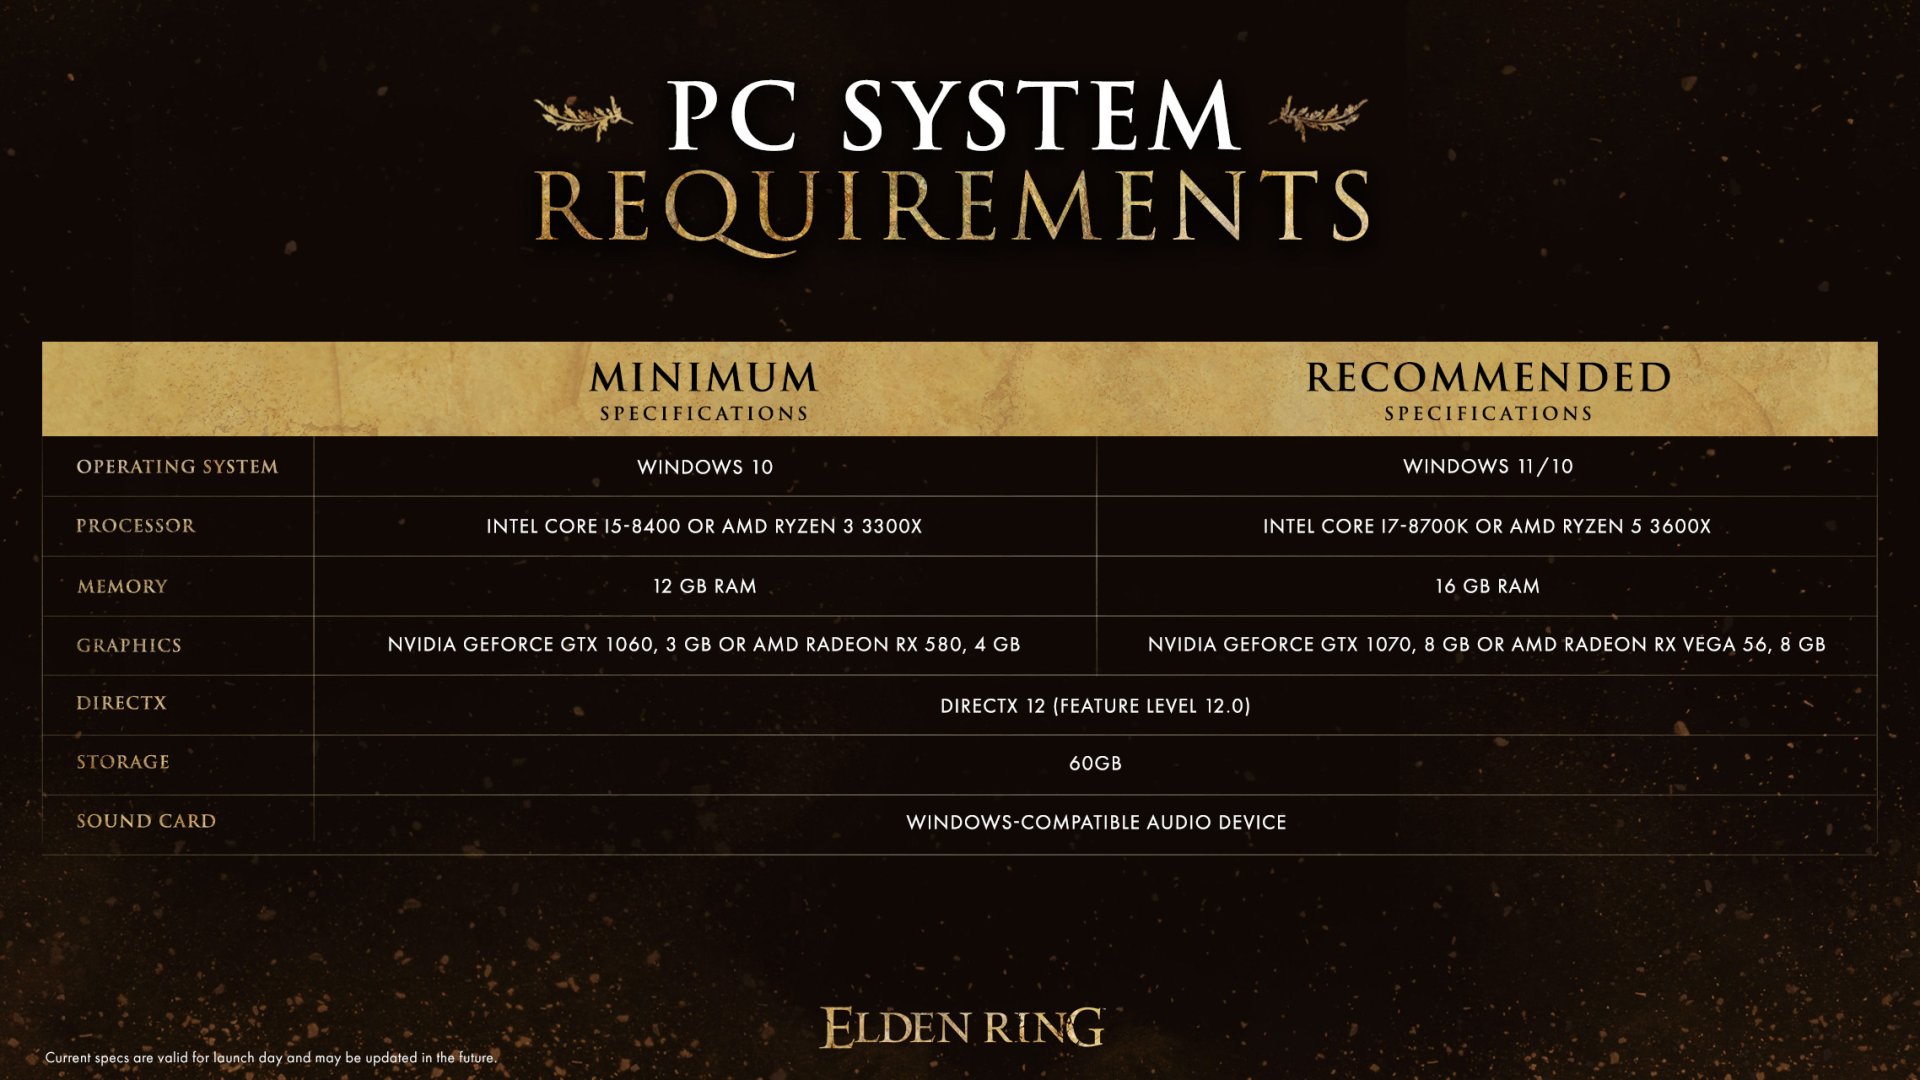 Elden Ring final PC system requirements